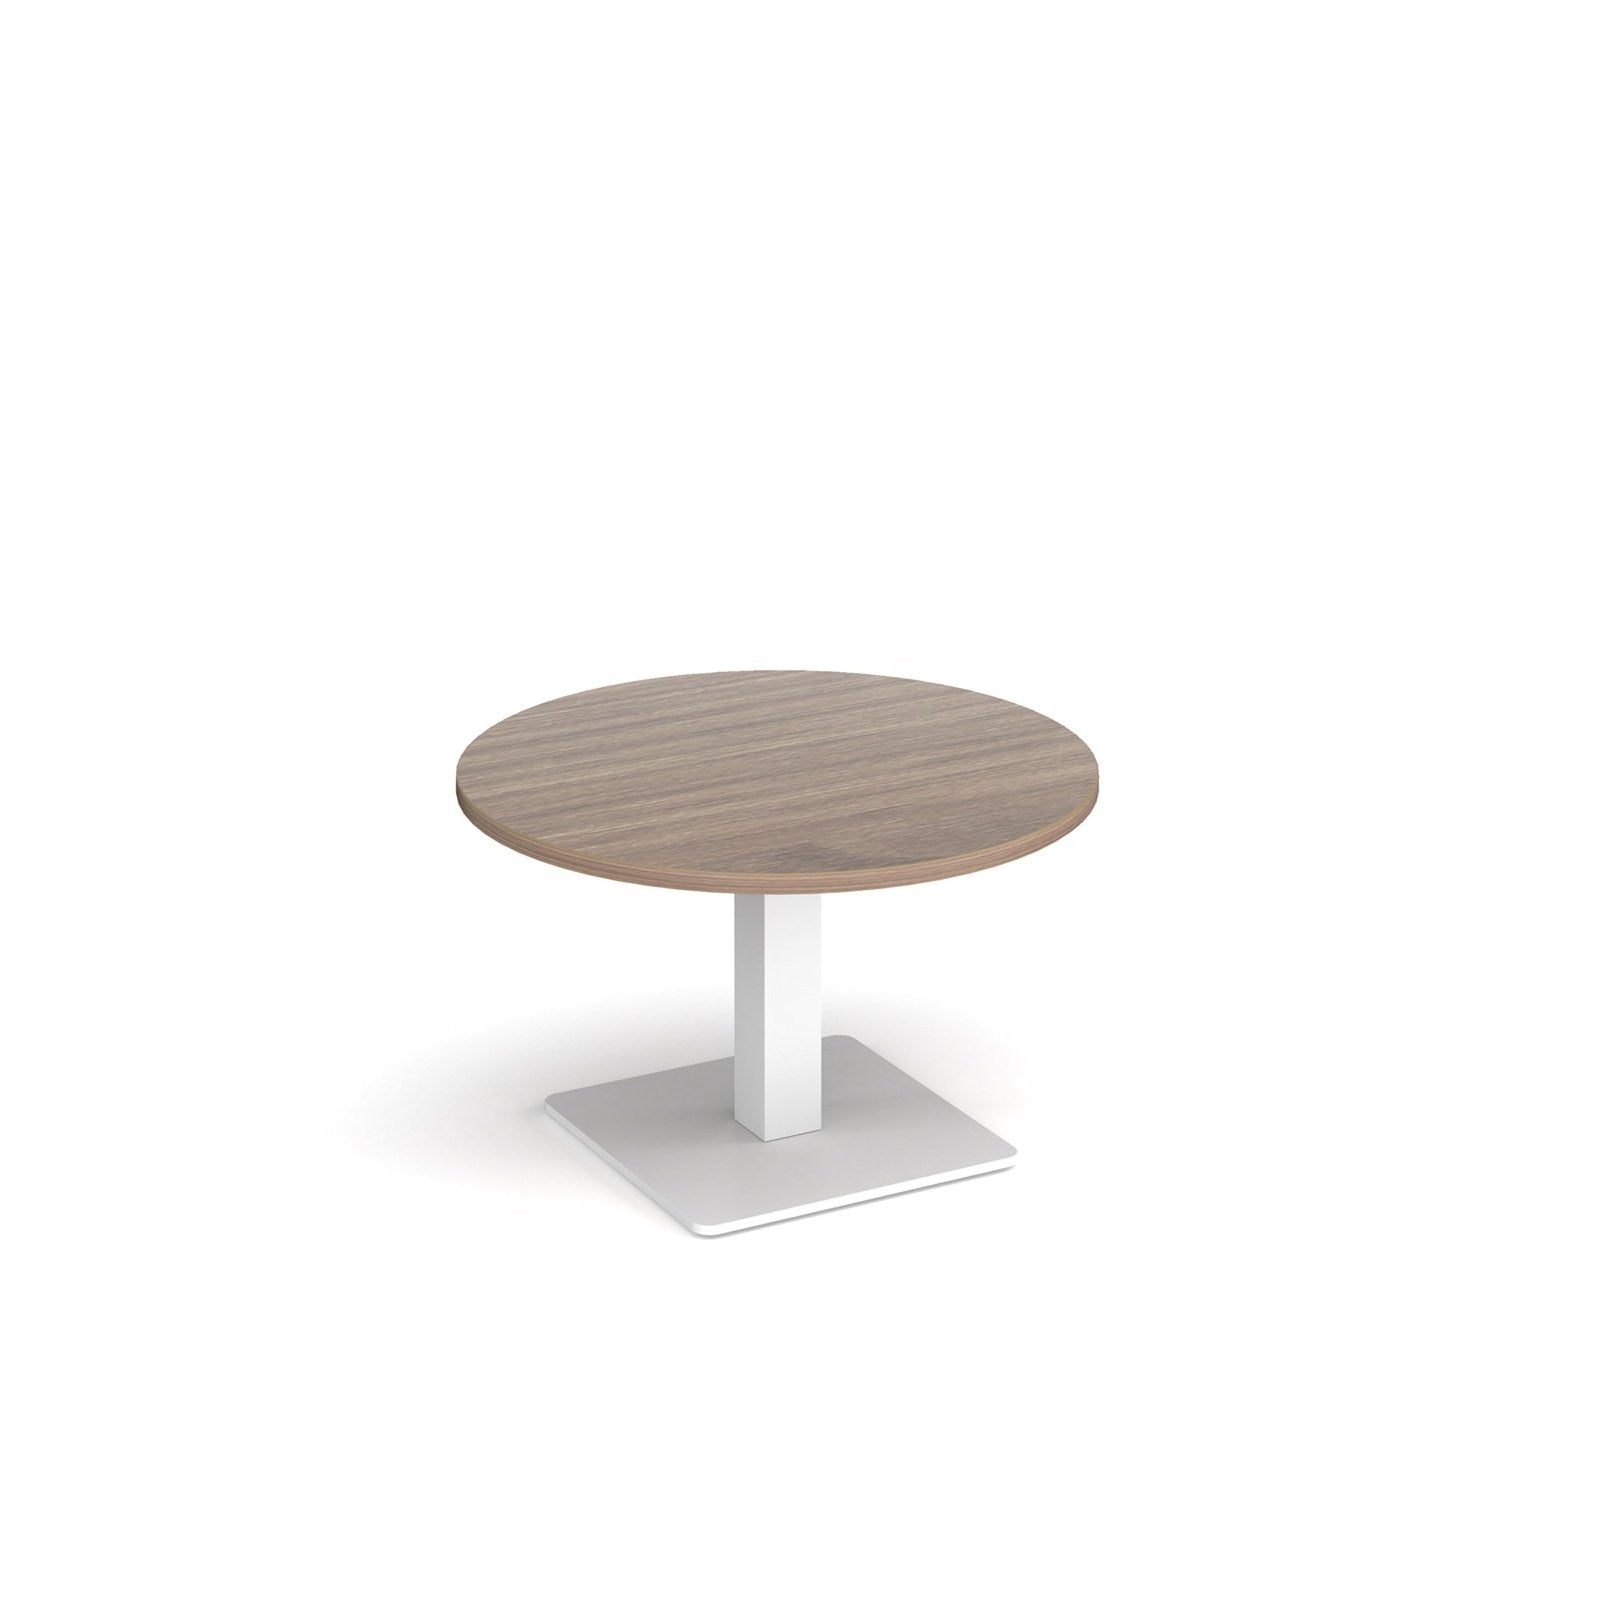 Brescia circular coffee table - Office Products Online